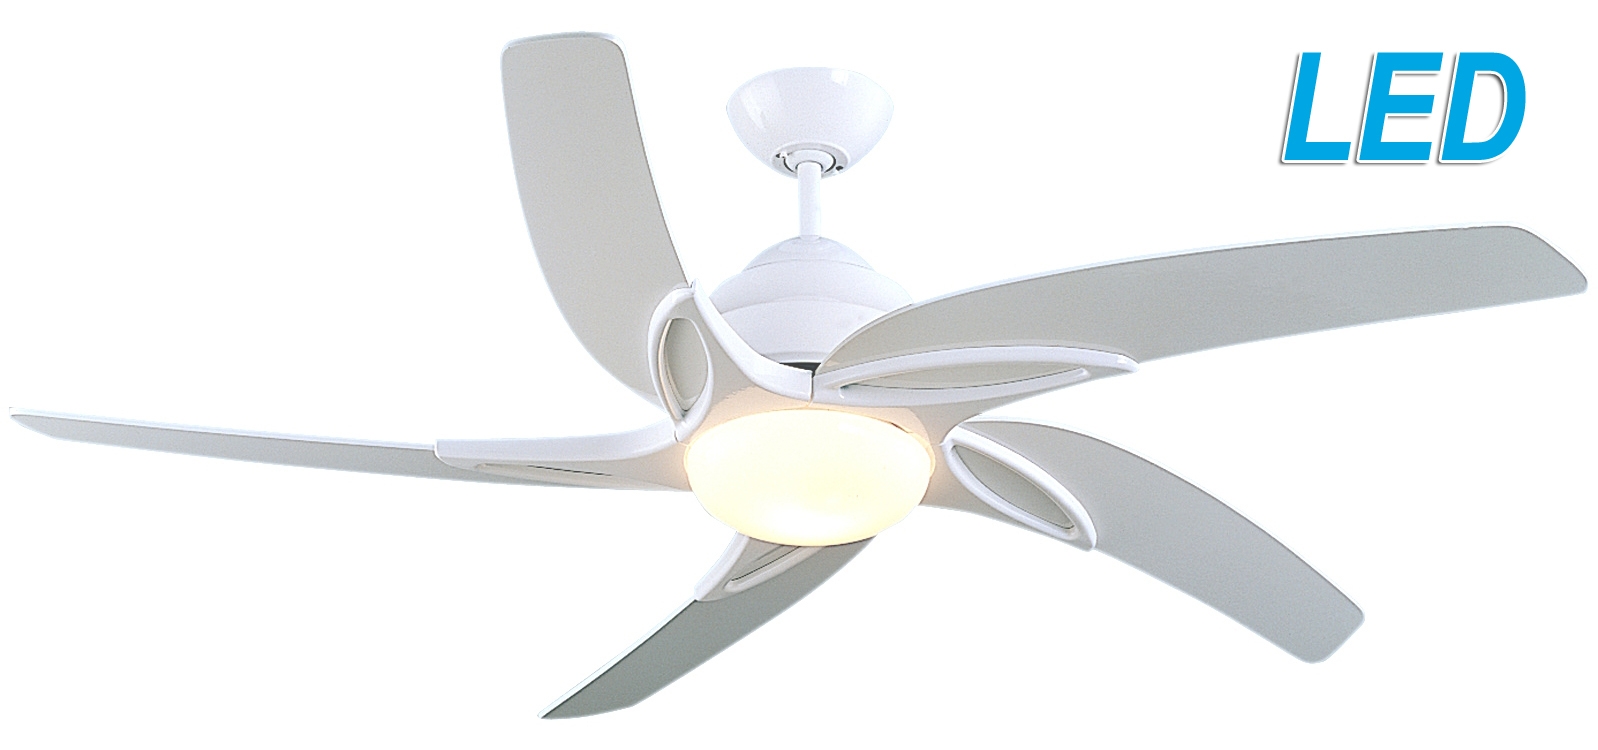 Ceiling Fan With Led Light And Remote Controlled light design ceiling fan with led light and remote control